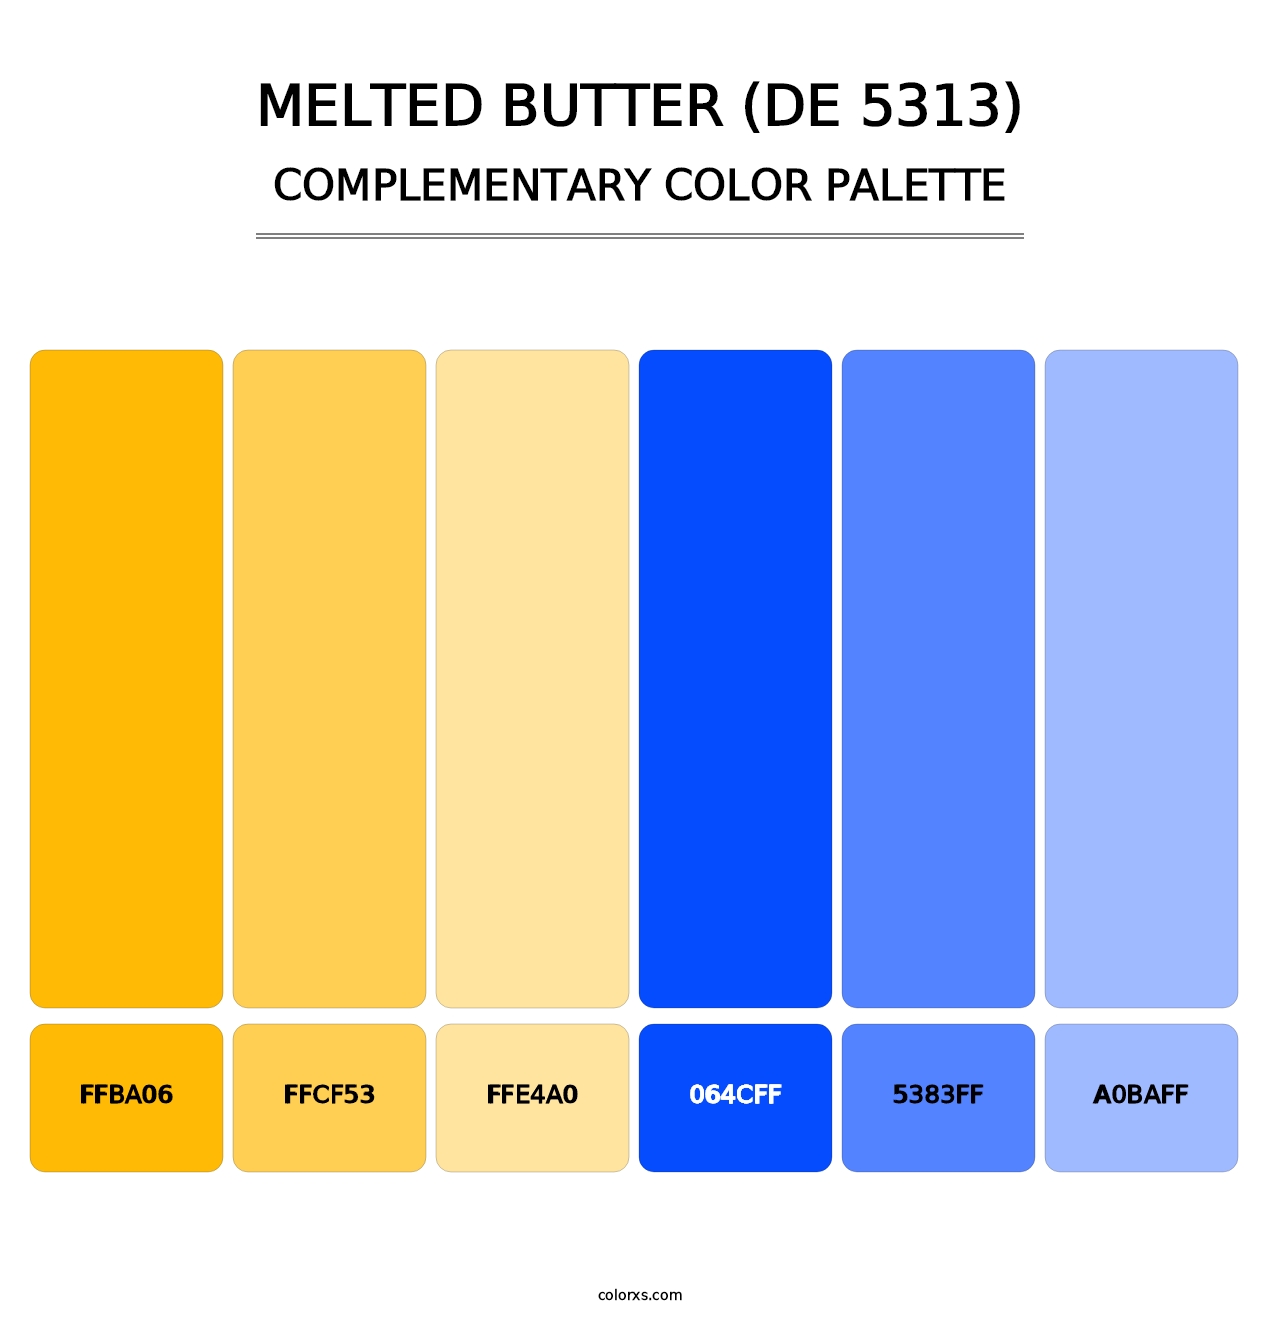 Melted Butter (DE 5313) - Complementary Color Palette